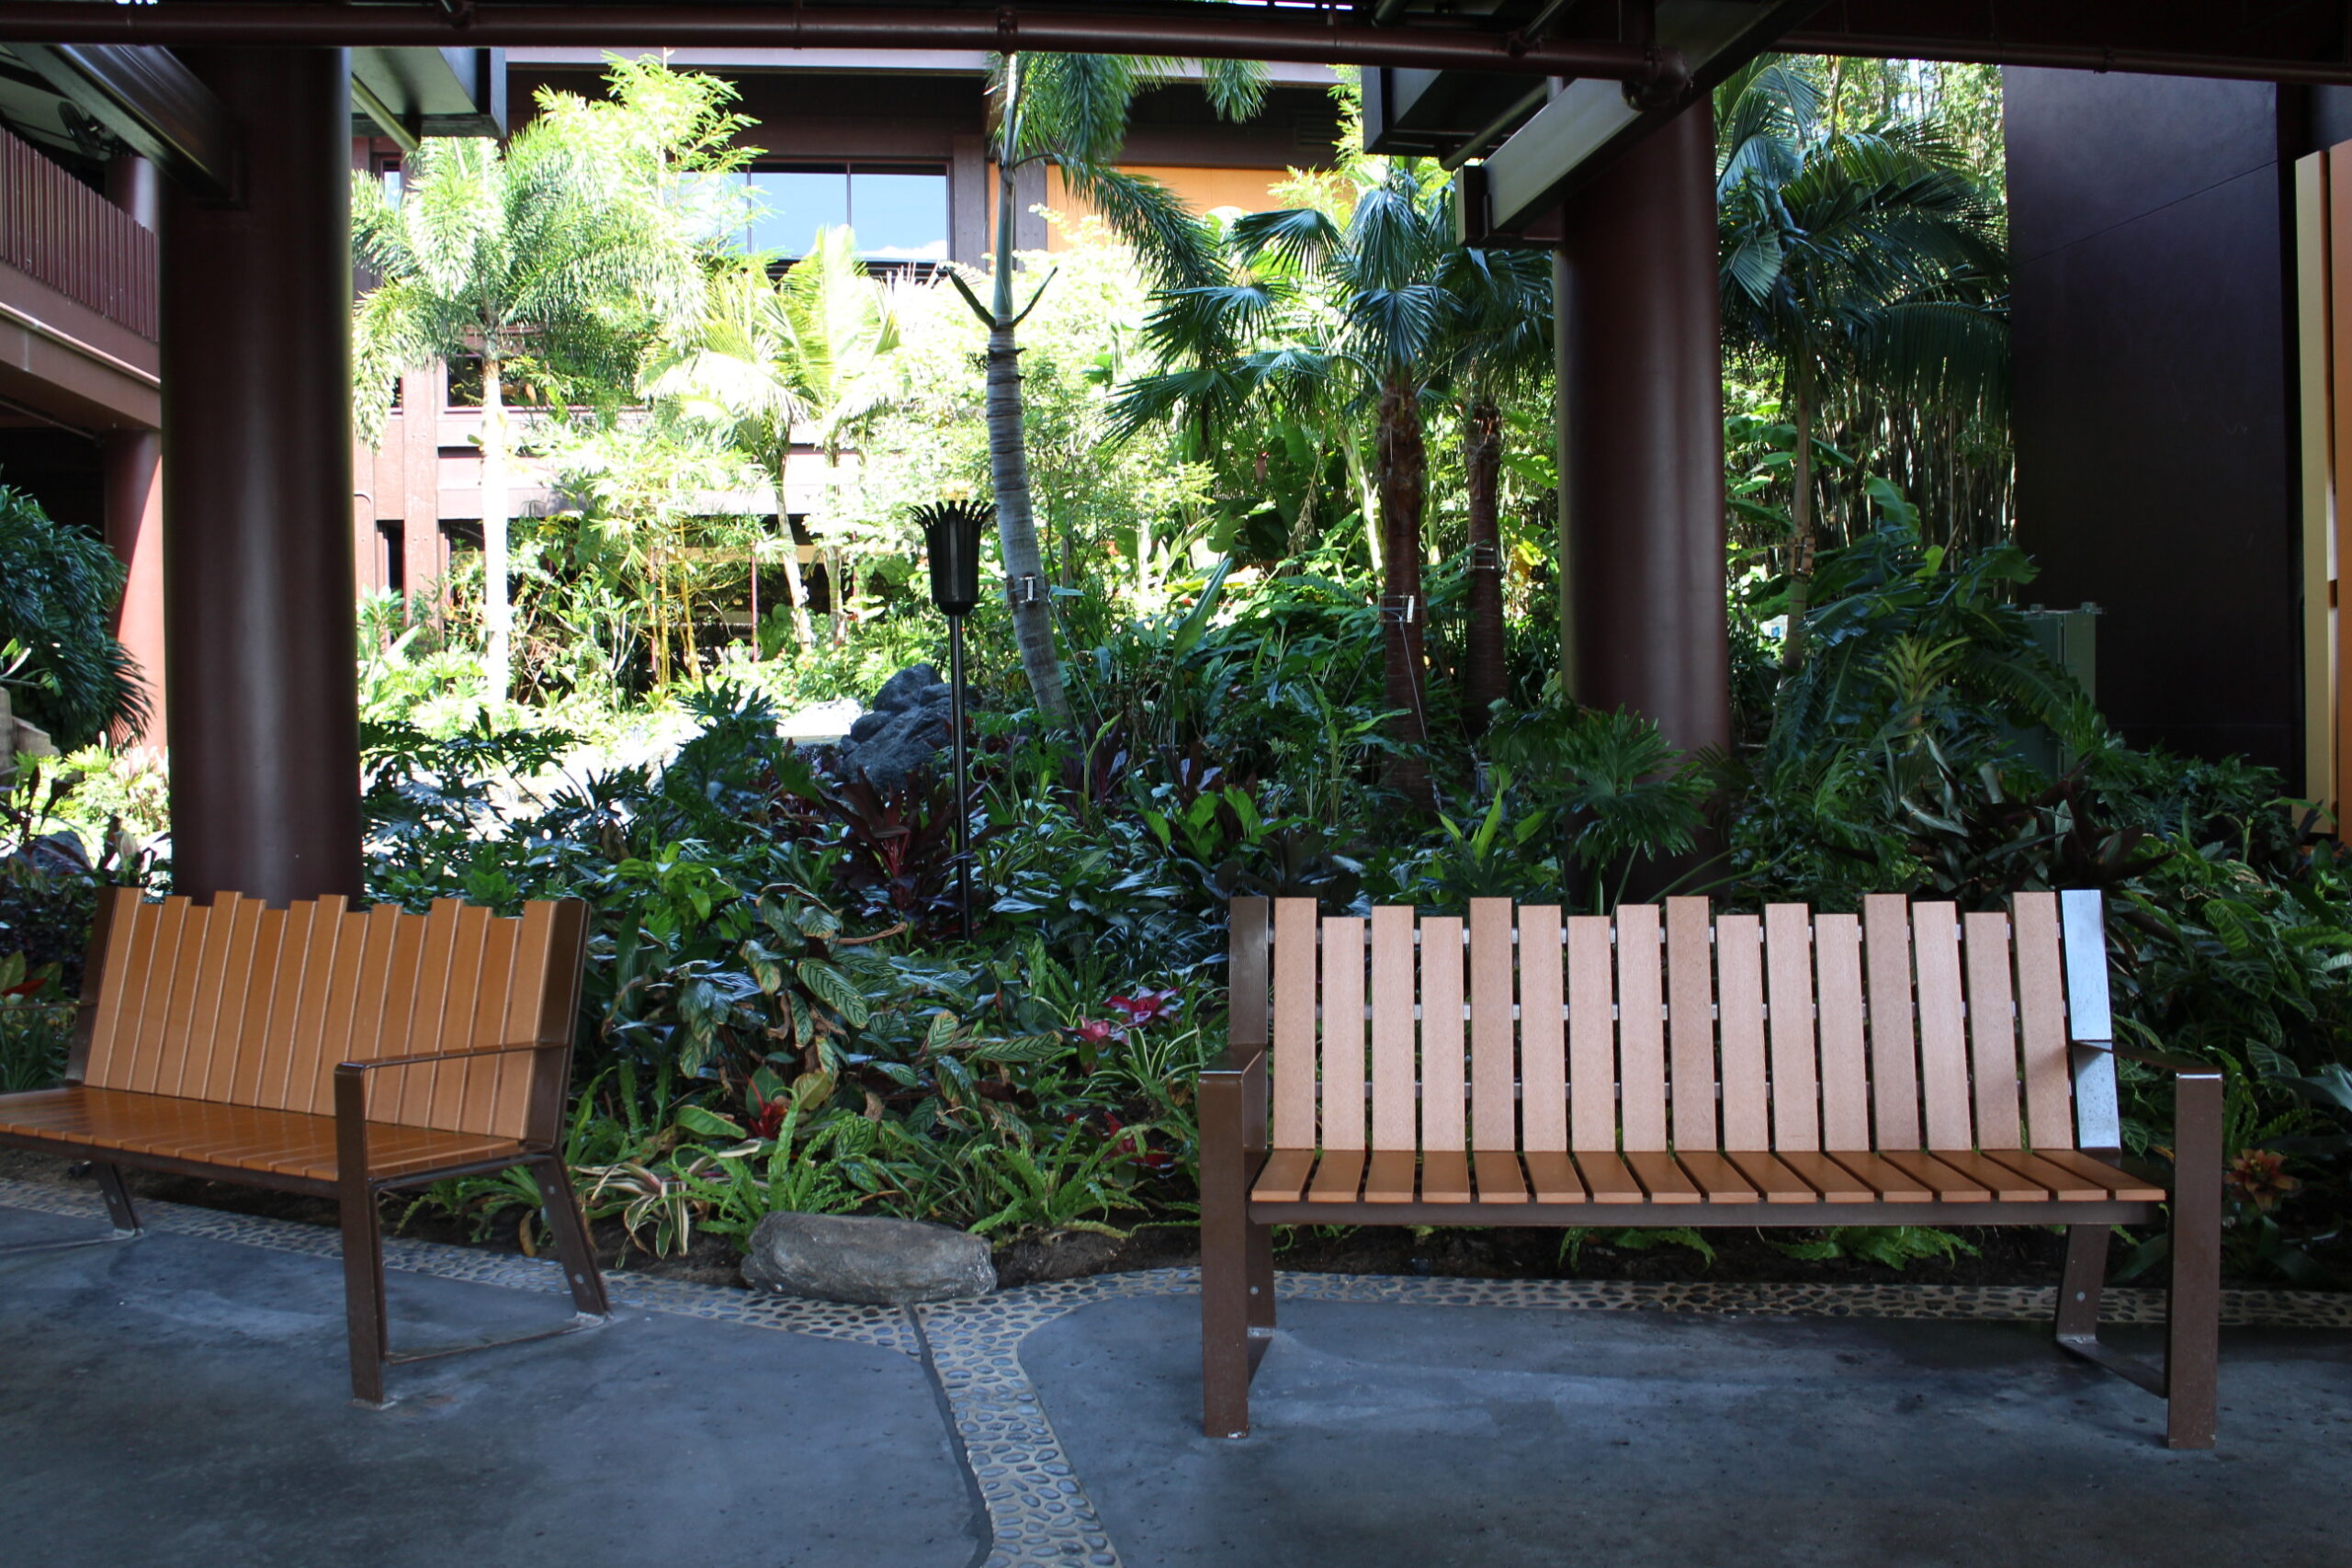 benches in front of a tropical landscape outside of the Polynesian resort